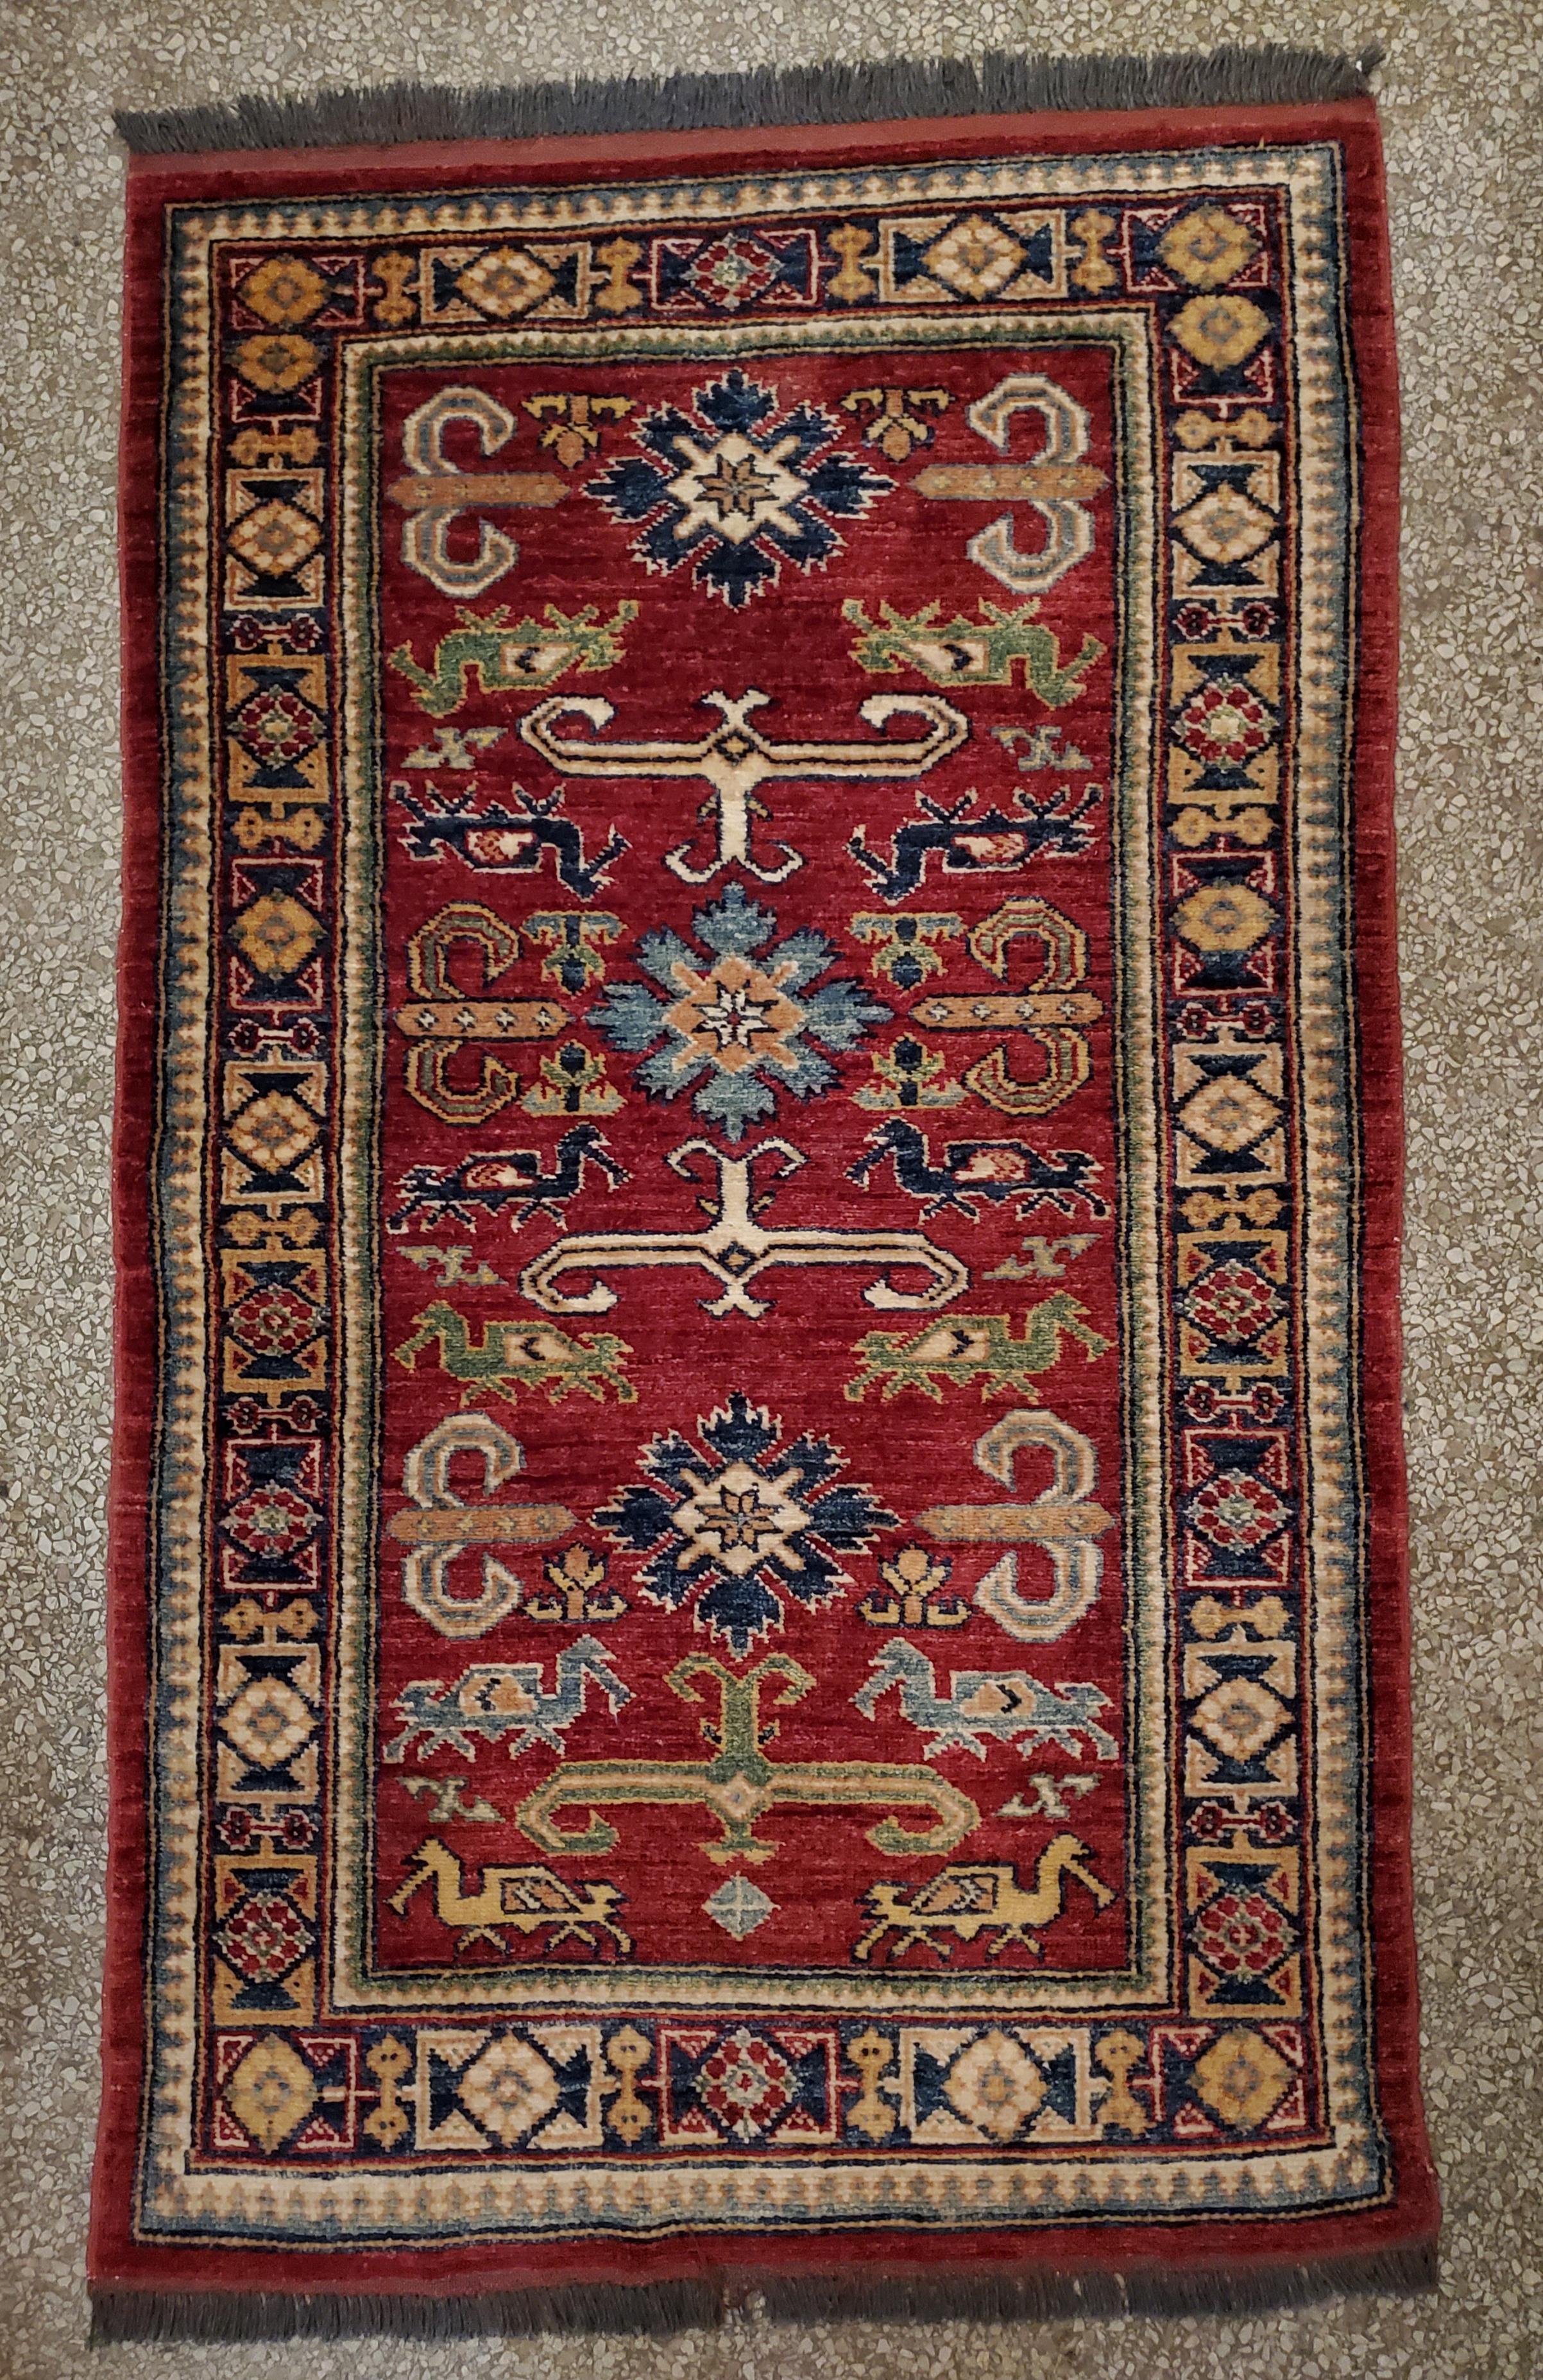 We carry some of the best Afghan bedside rugs, and if you are willing to give your room a colorful new look with one of our stunning carpets, we are here to help. This one measures approximately 51